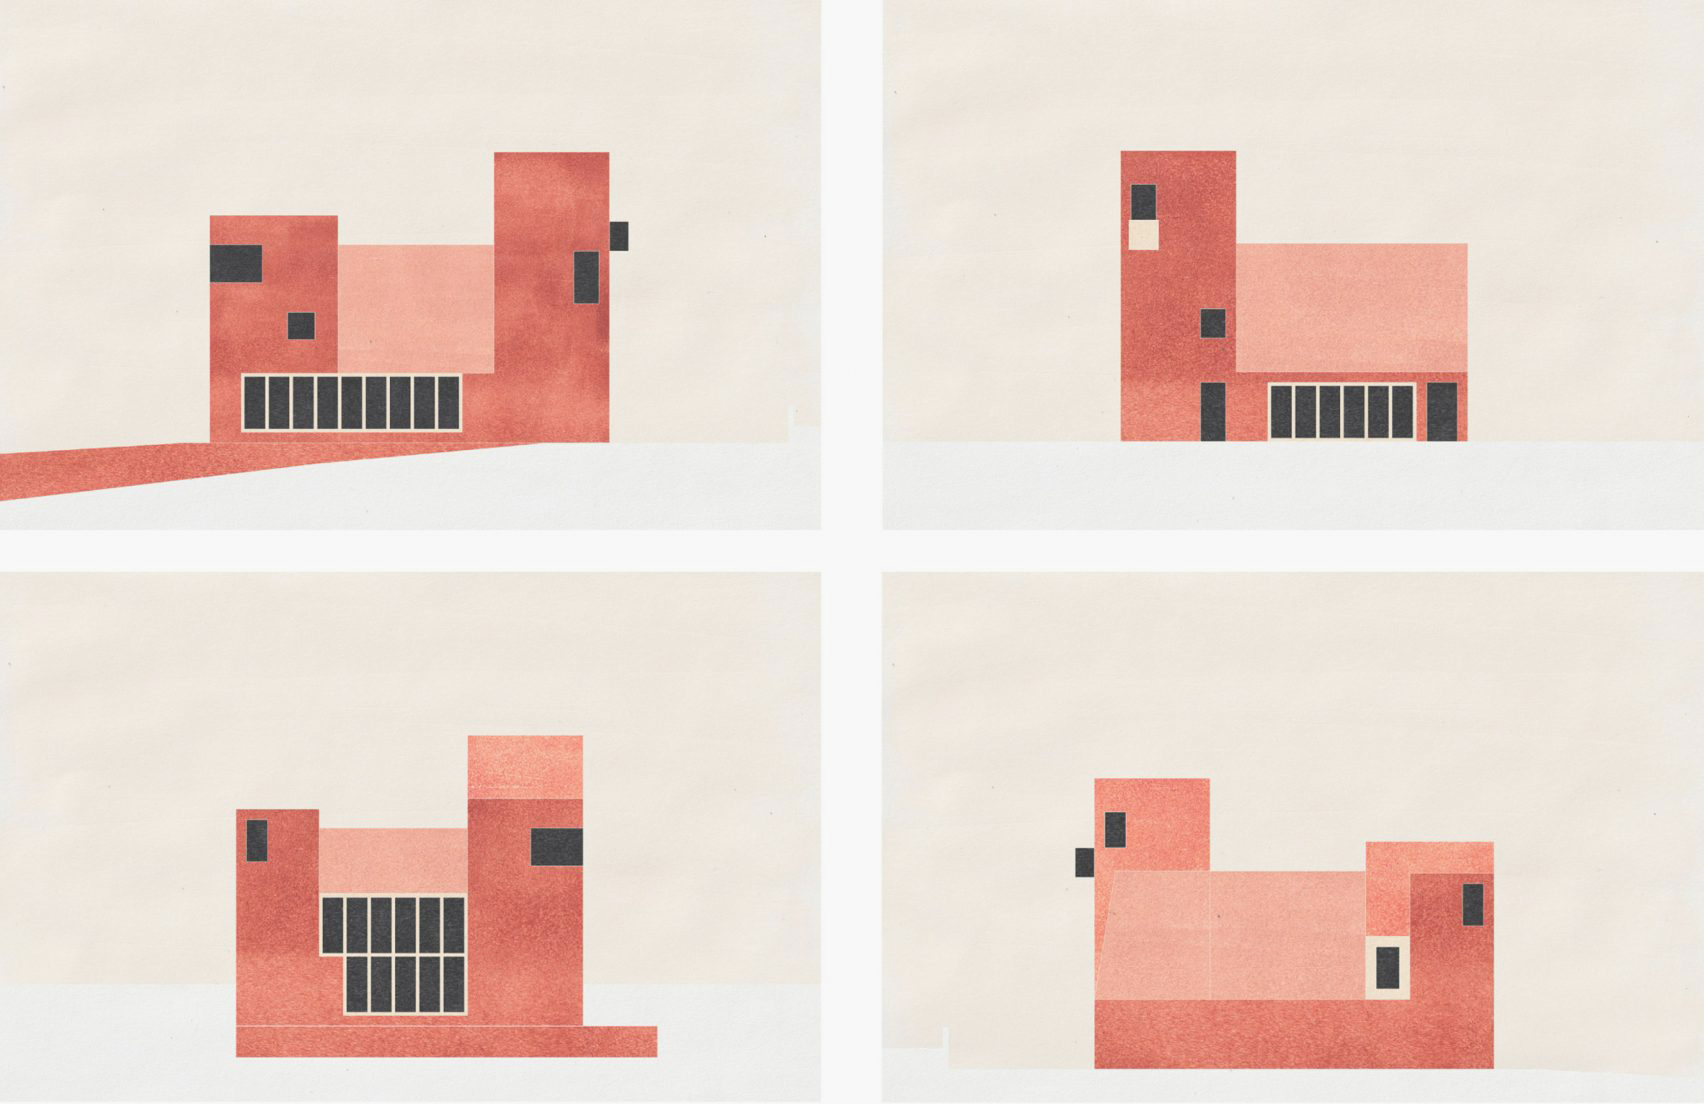 Four rose-coloured 2D drawings of a coastal dwelling